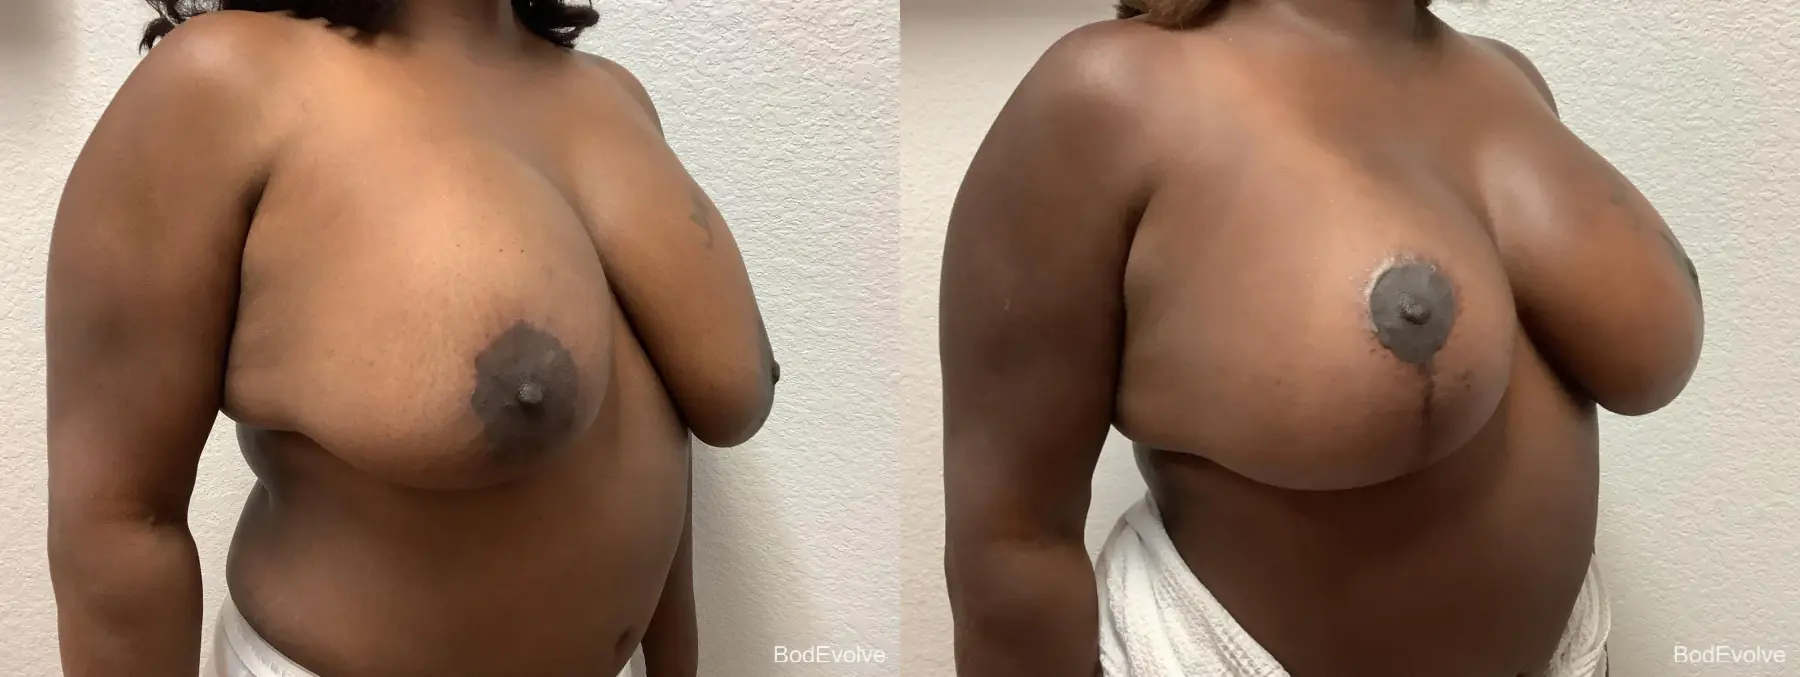 Breast Augmentation With Lift: Patient 2 - Before and After 5